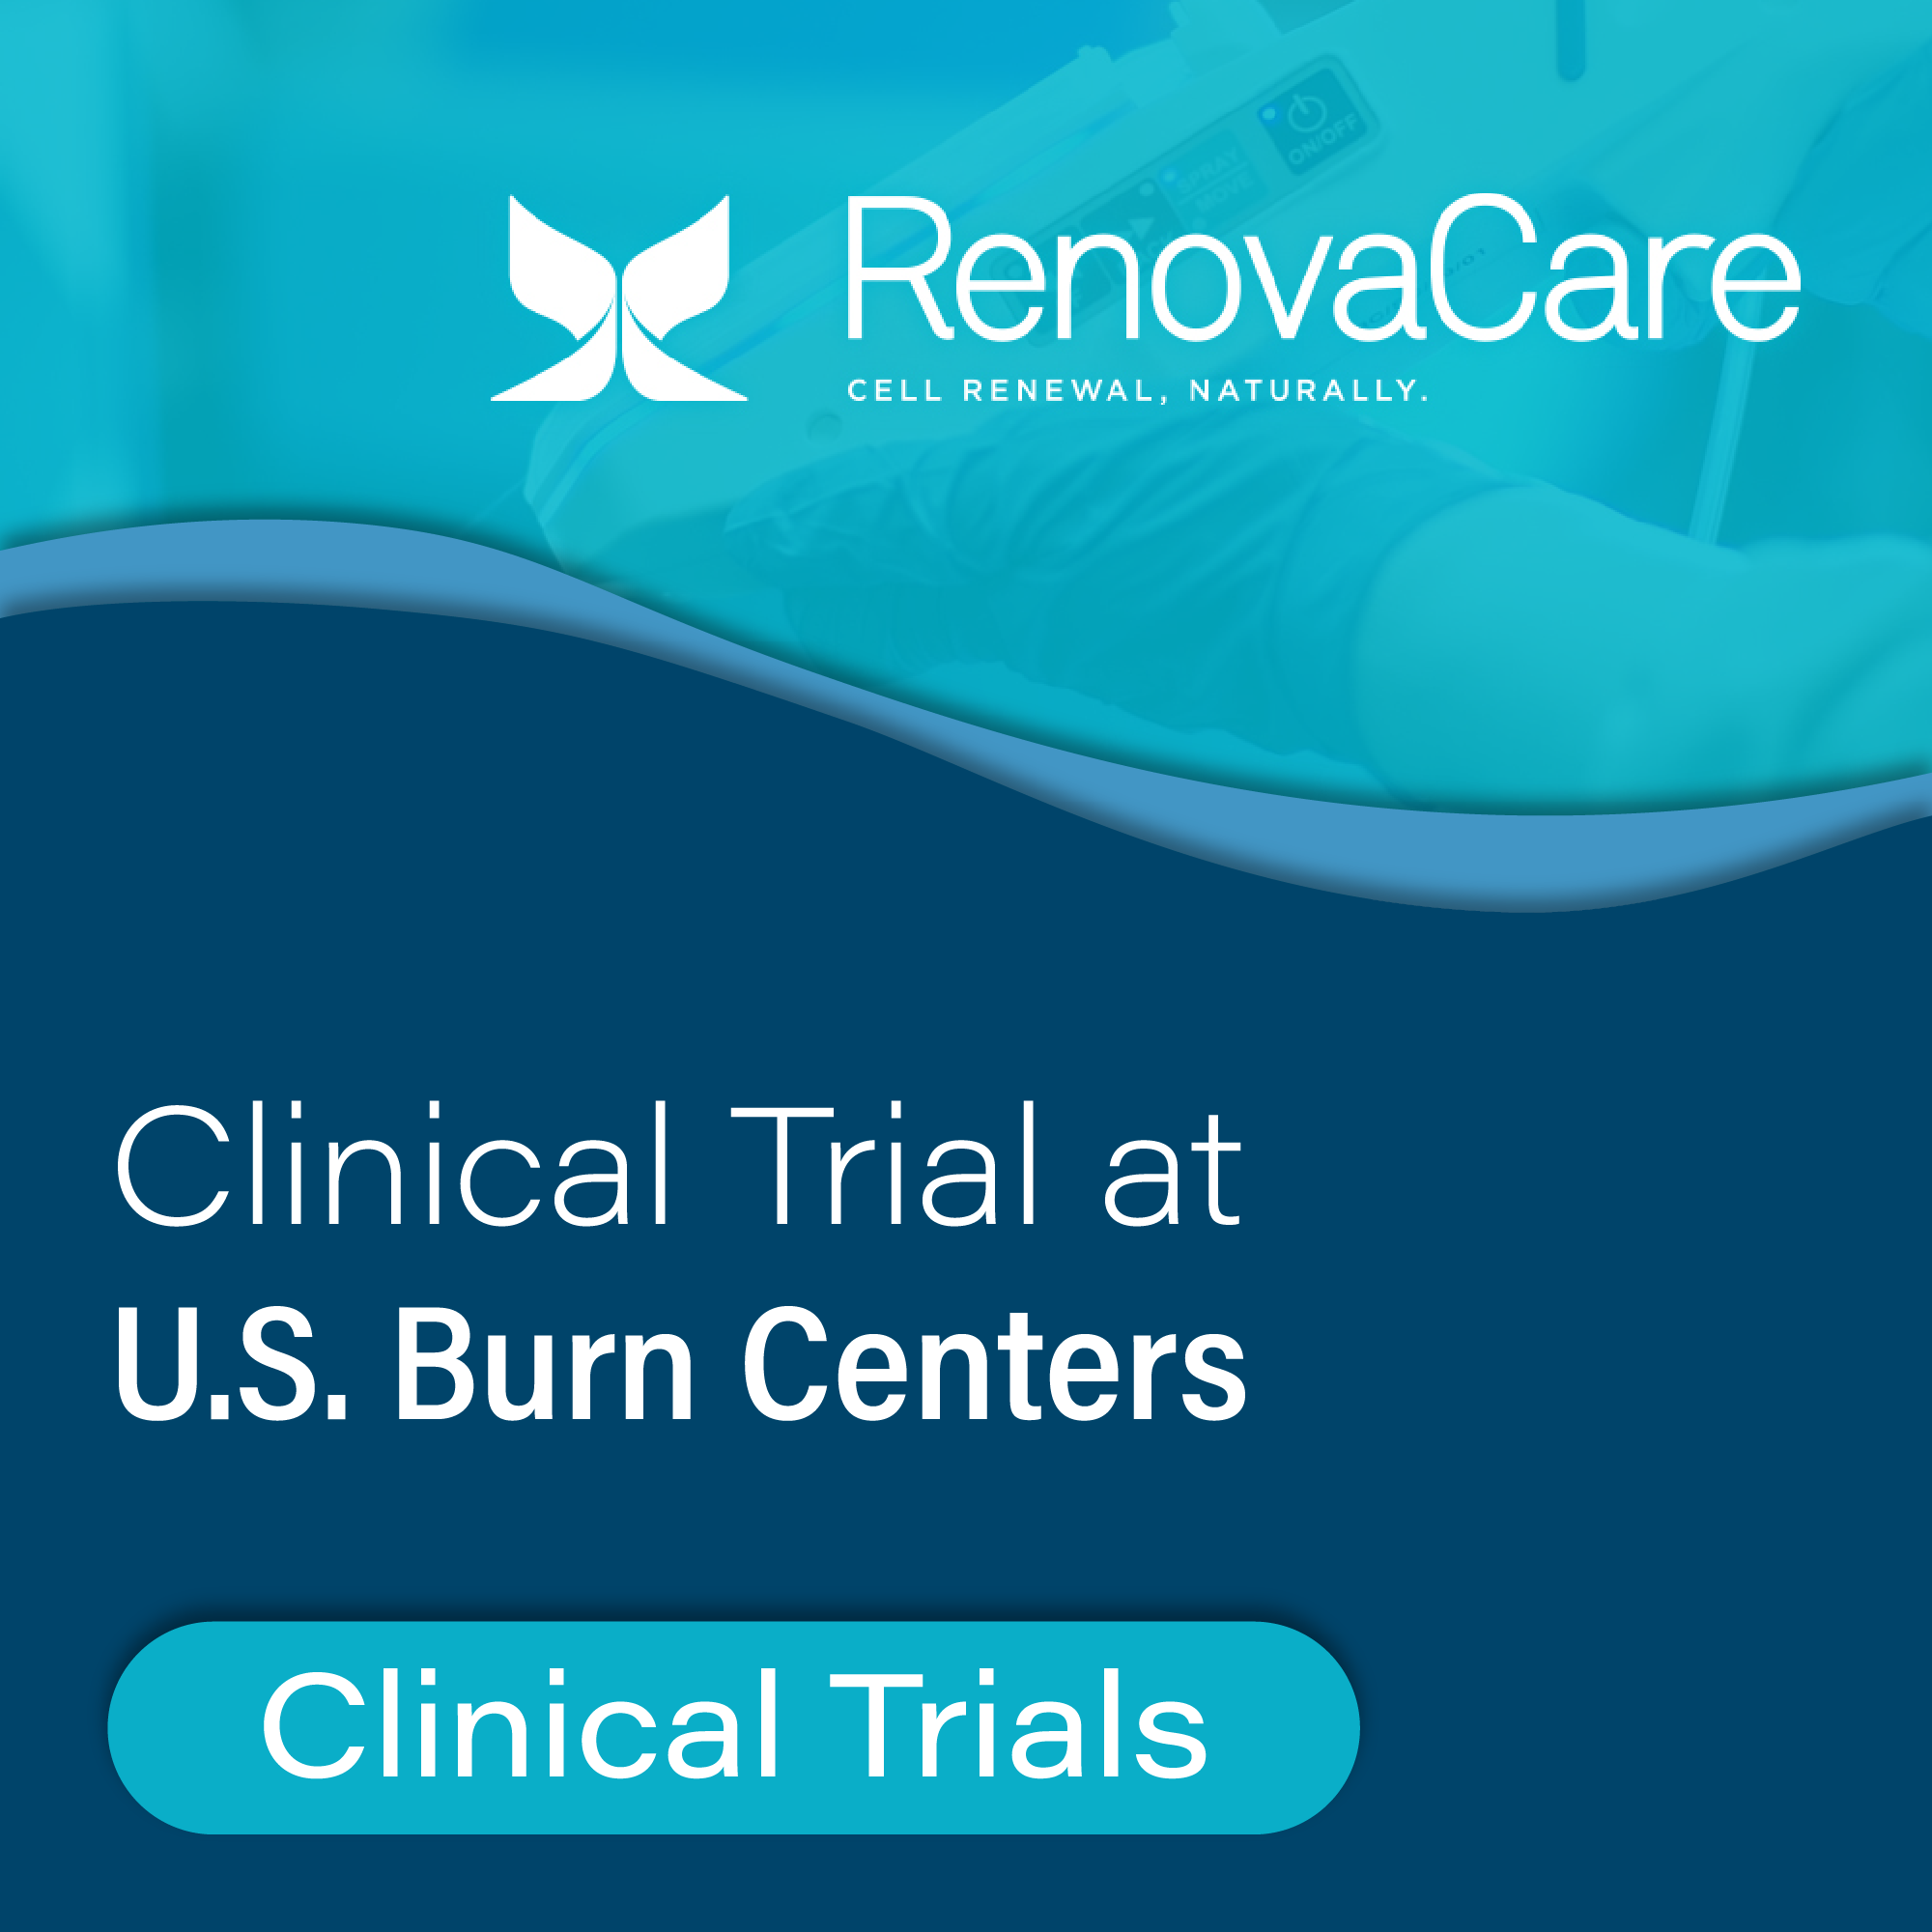 RenovaCare Clinical Trial to Start at U.S. Burn Centers